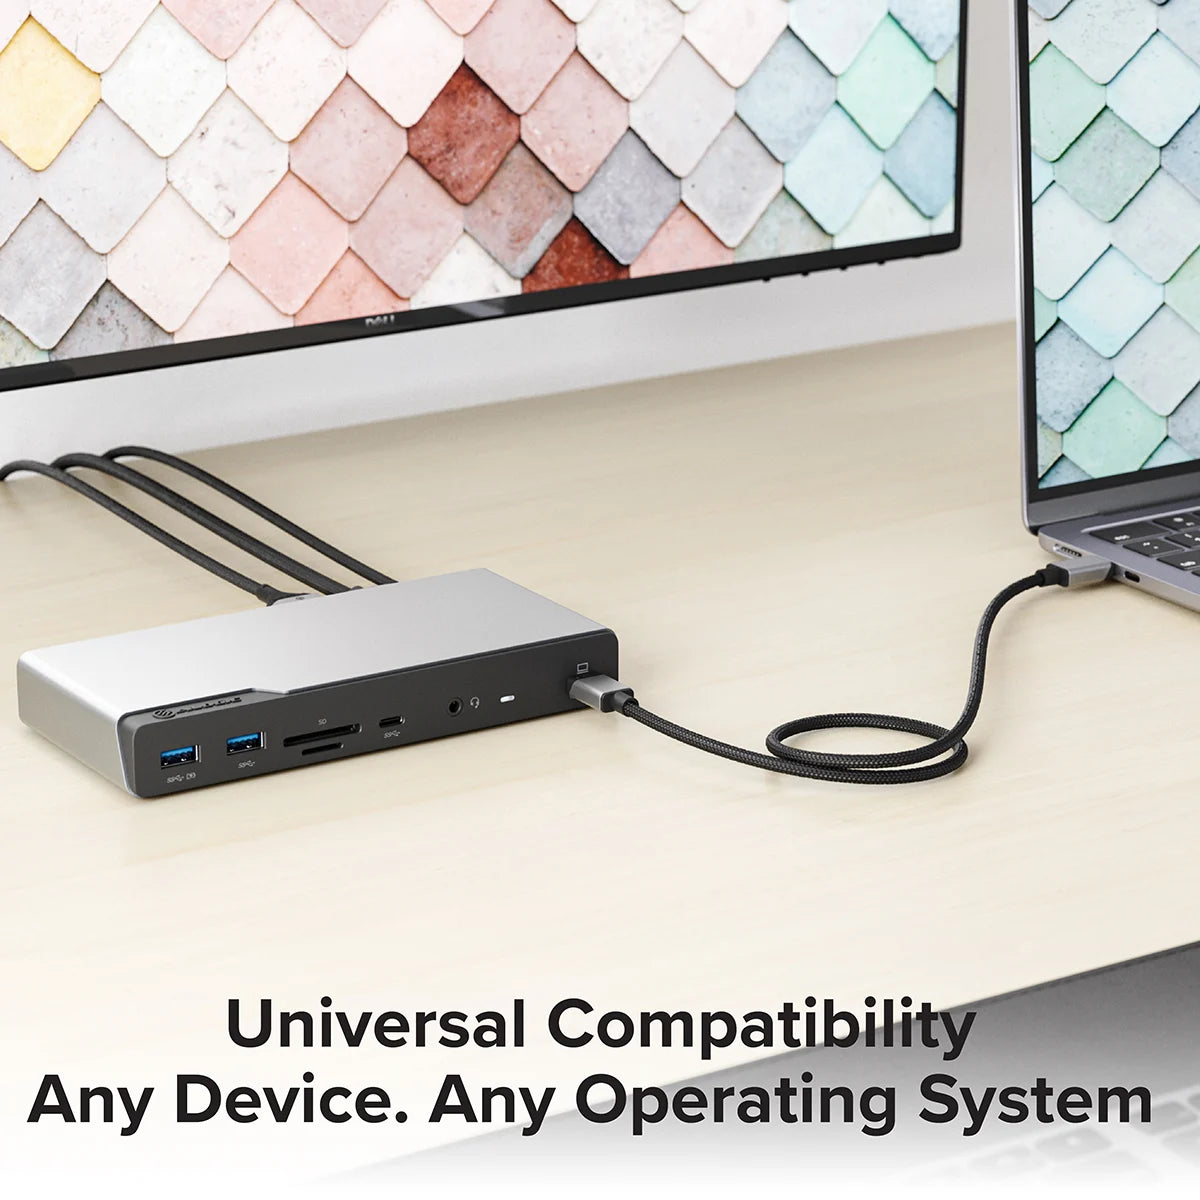 DV4 Universal Quad Display Docking Station with 100W Power Delivery - Power Adapter Included